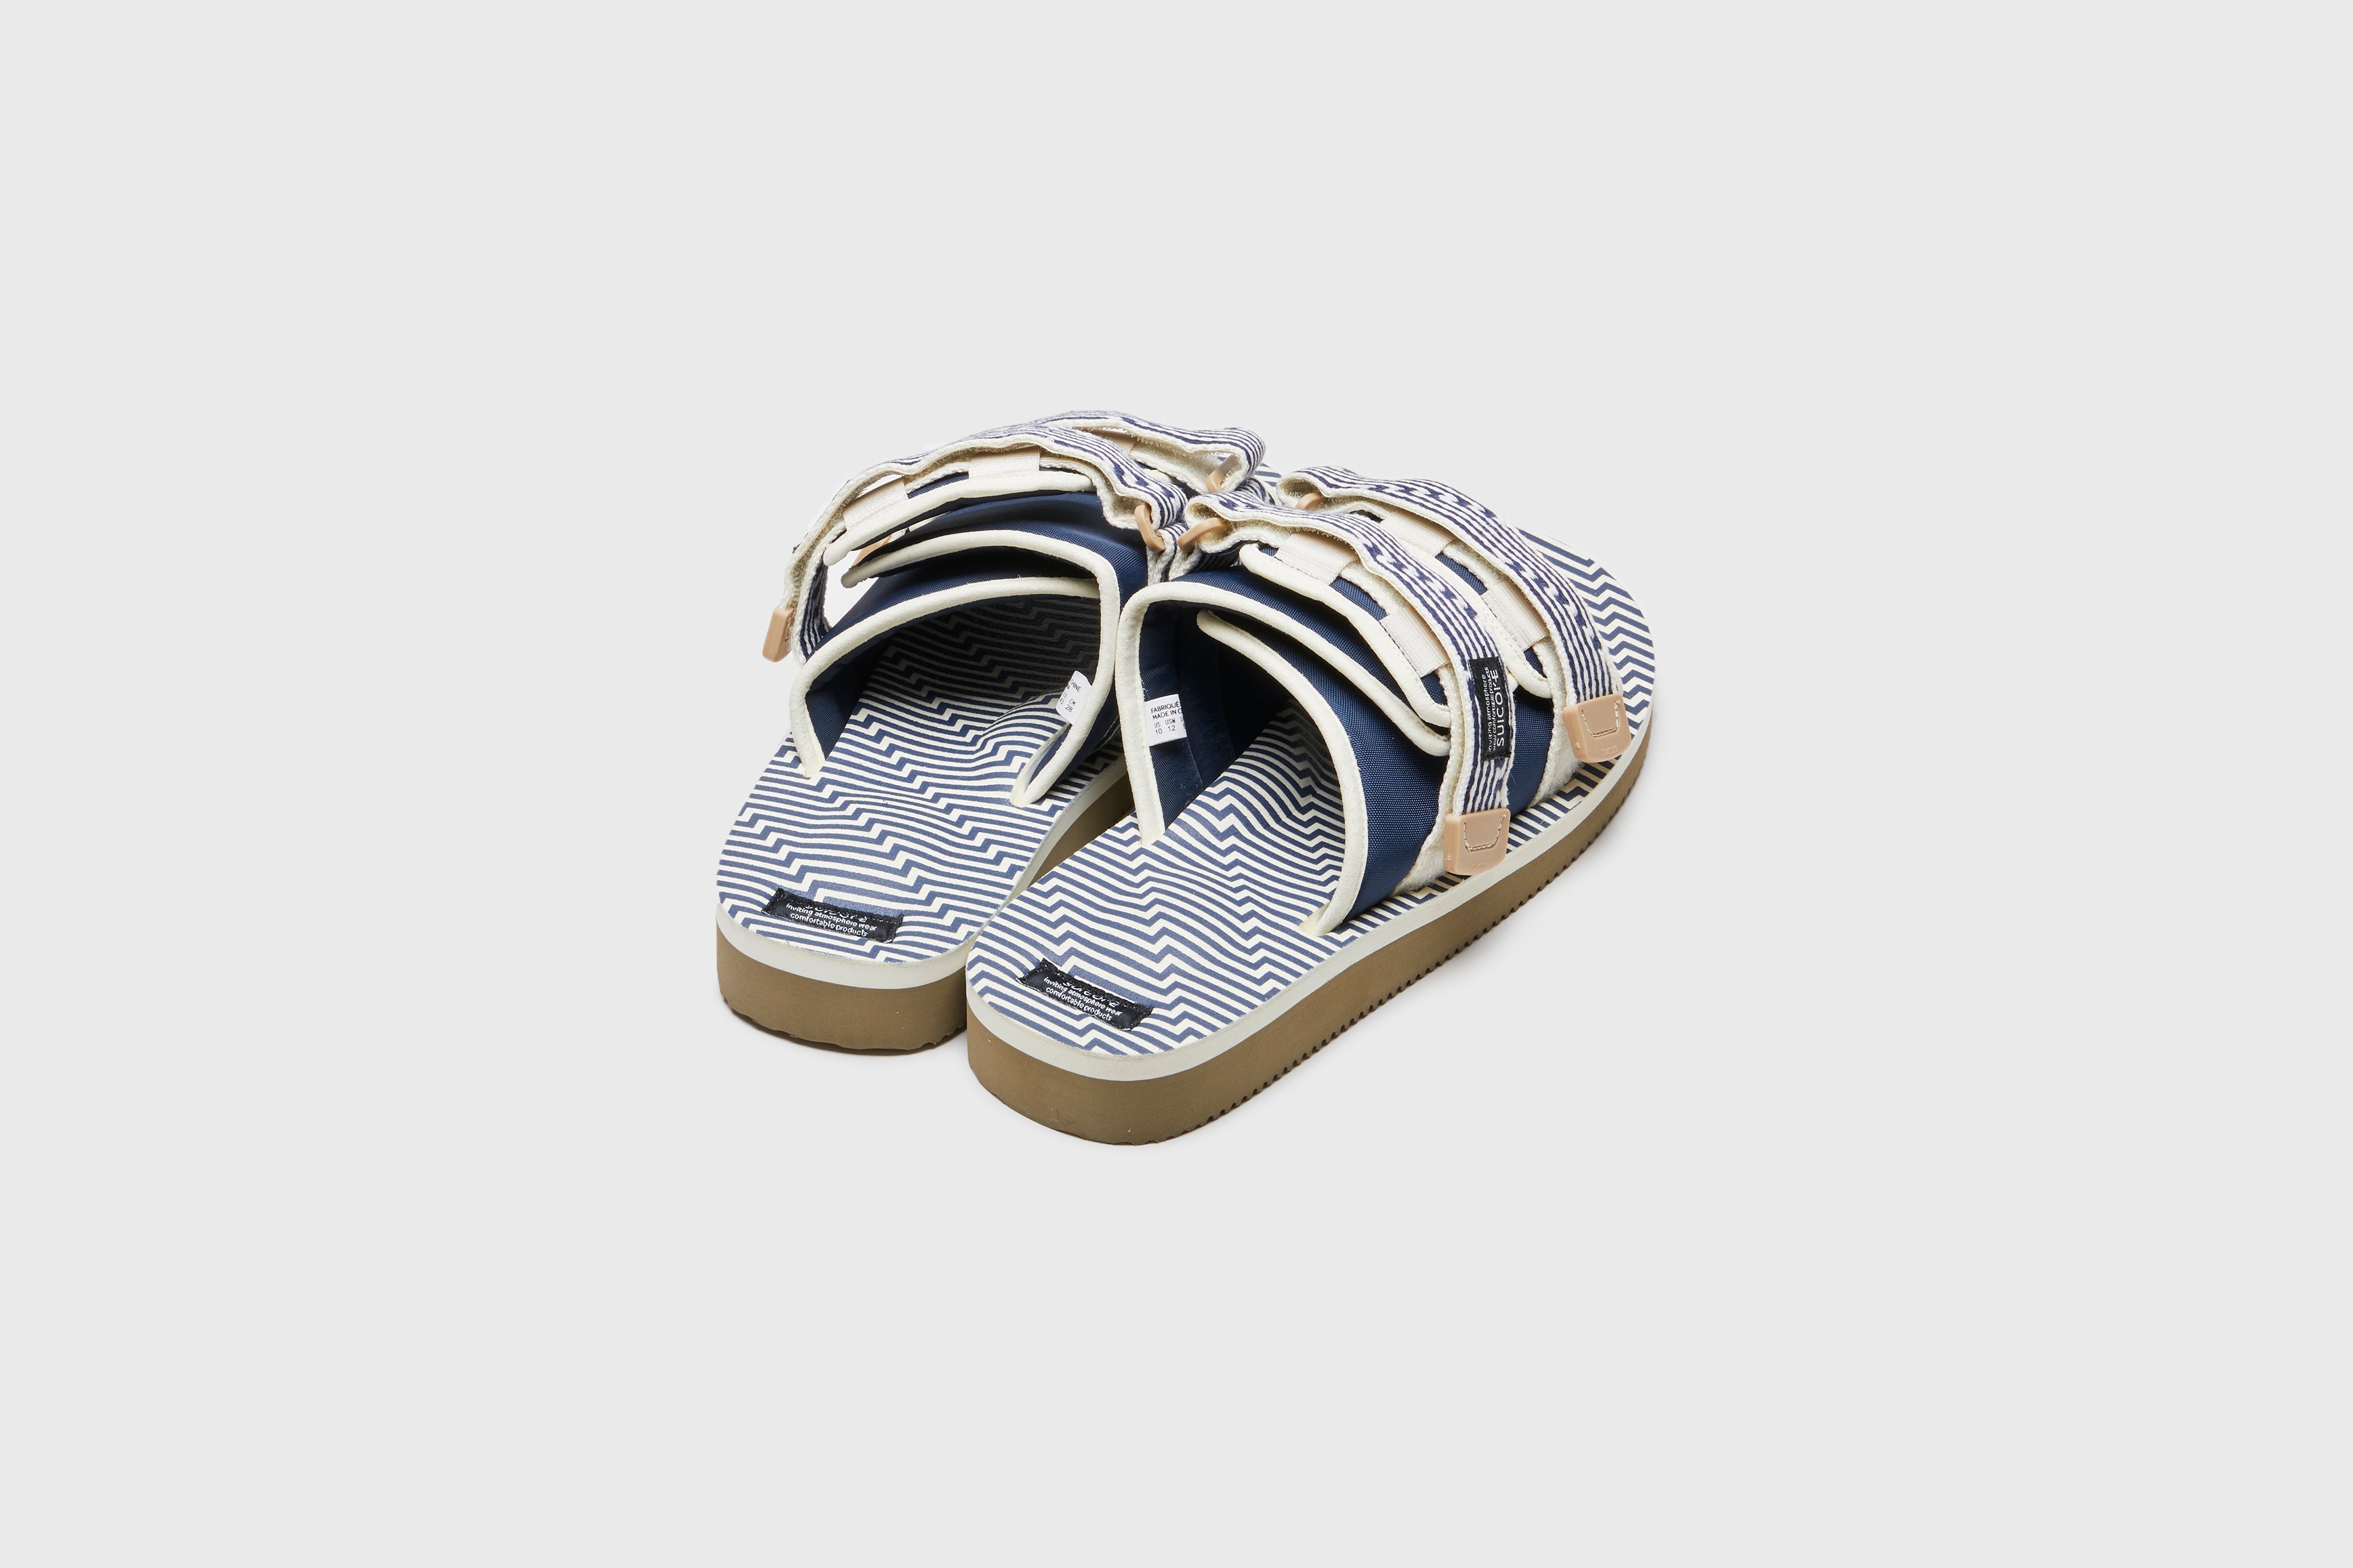 SUICOKE MOTO-JC01 slides with ivory &amp; navy nylon upper, ivory &amp; navy midsole and sole, strap and logo patch. From Spring/Summer 2023 collection on eightywingold Web Store, an official partner of SUICOKE. OG-056-JC01 IVORY X NAVY